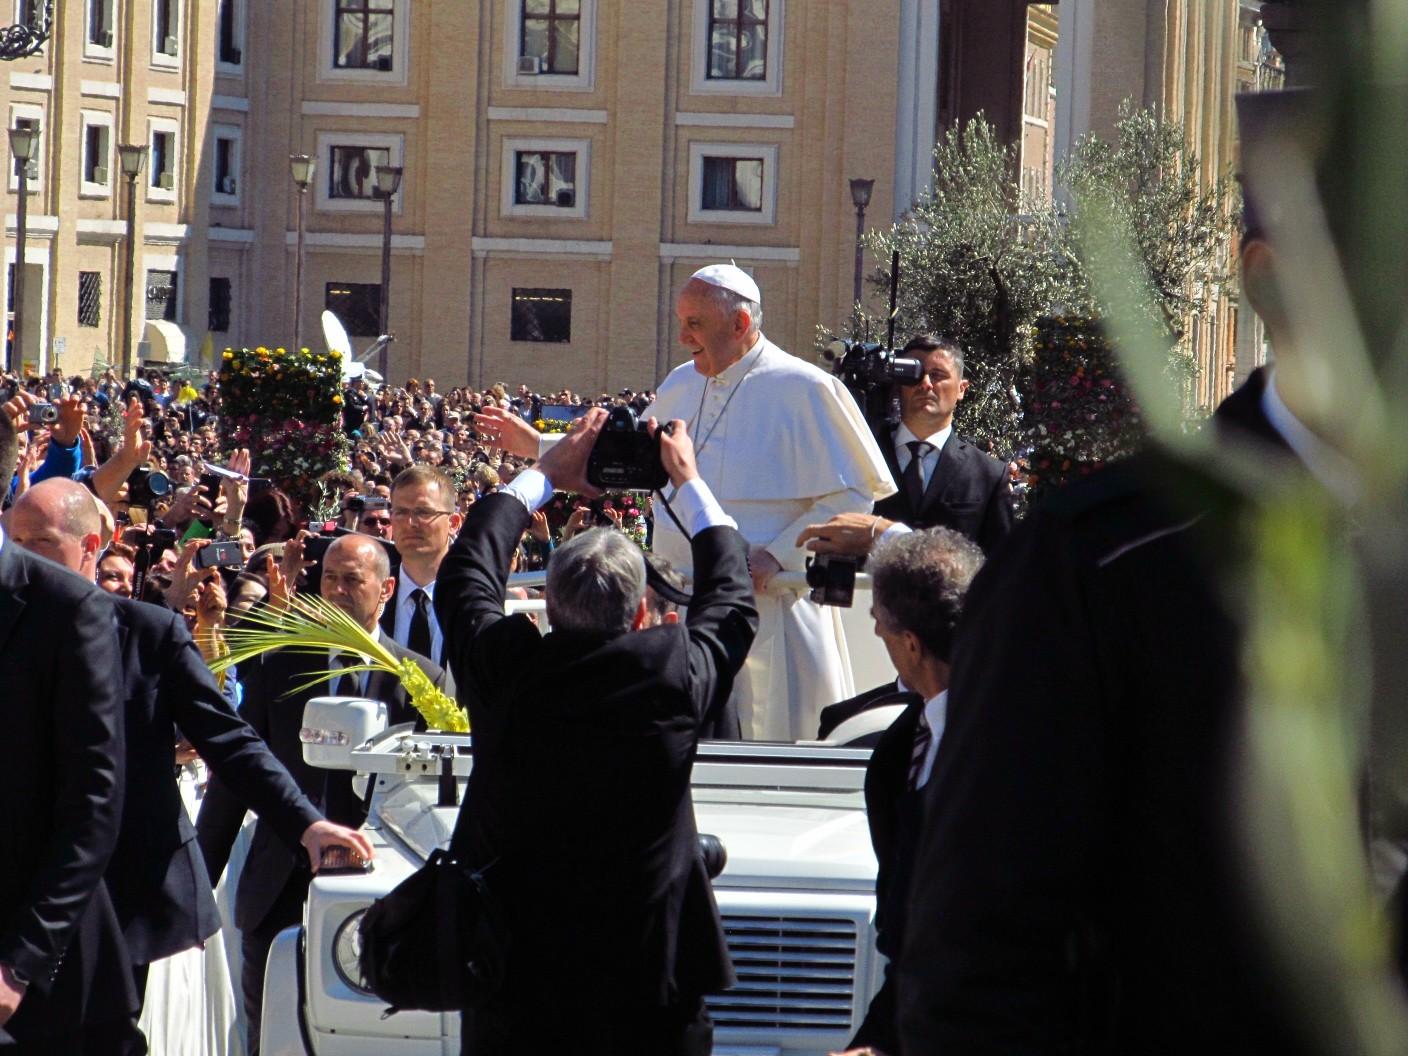 The Popemobile is one of the most famous cars in the world, so what company built it?